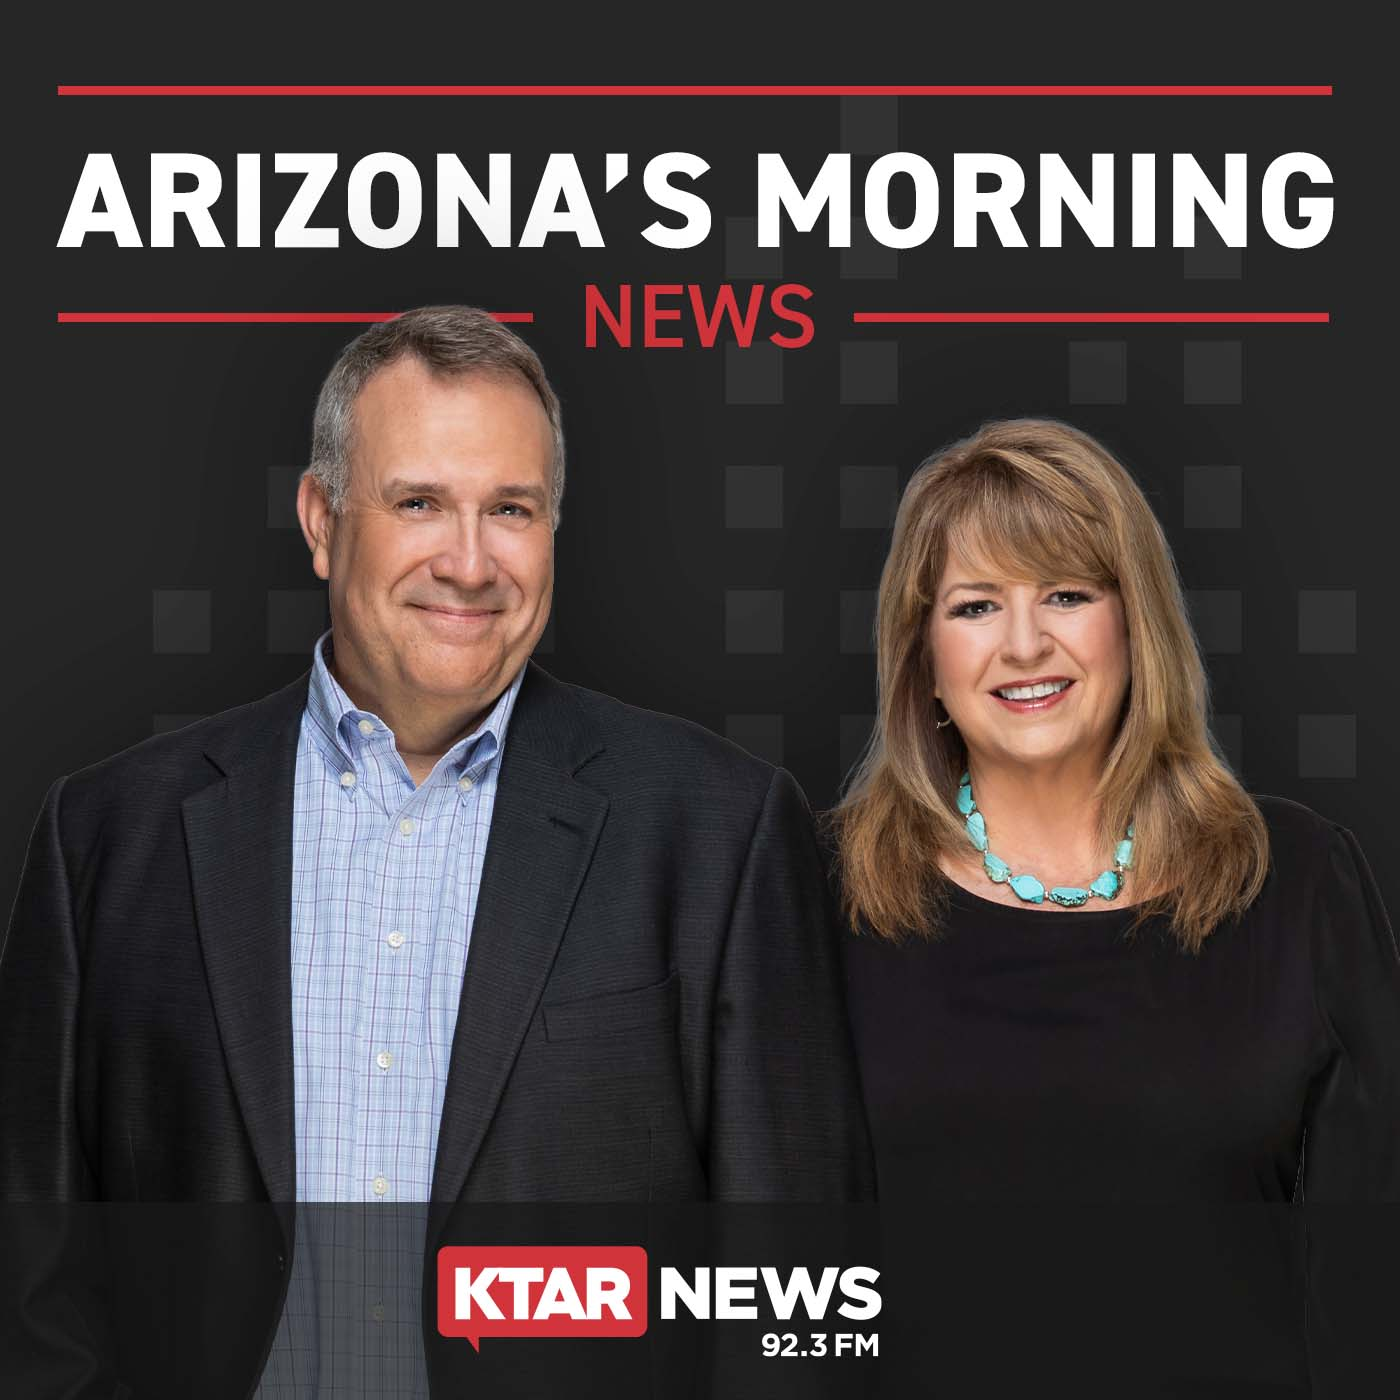 Sharper Point Commentary - Arizona election audits continue